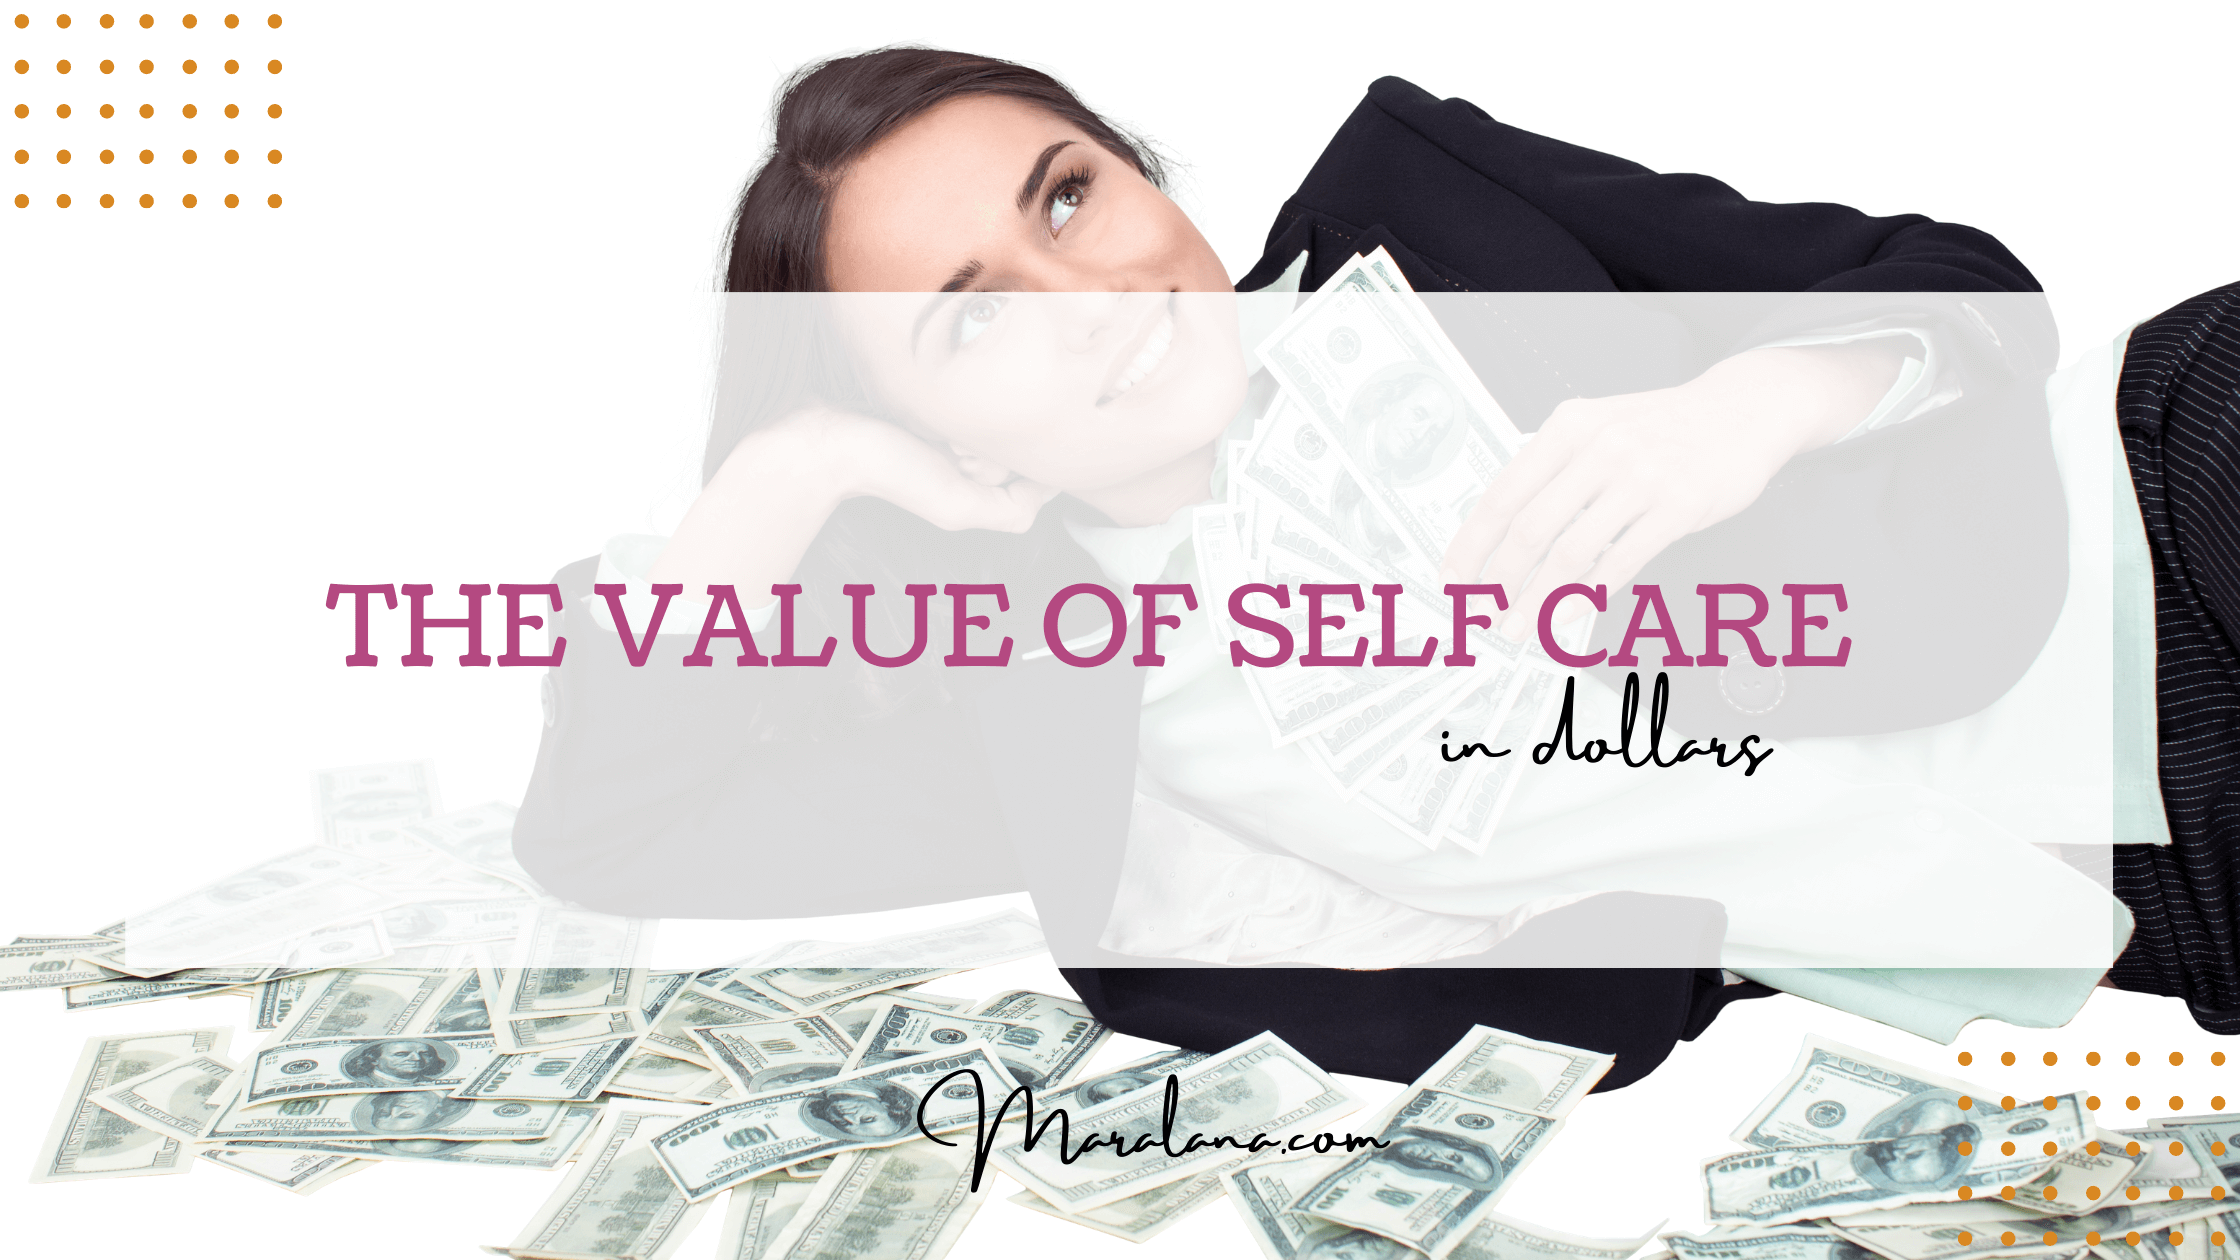 The value of self care in dollars